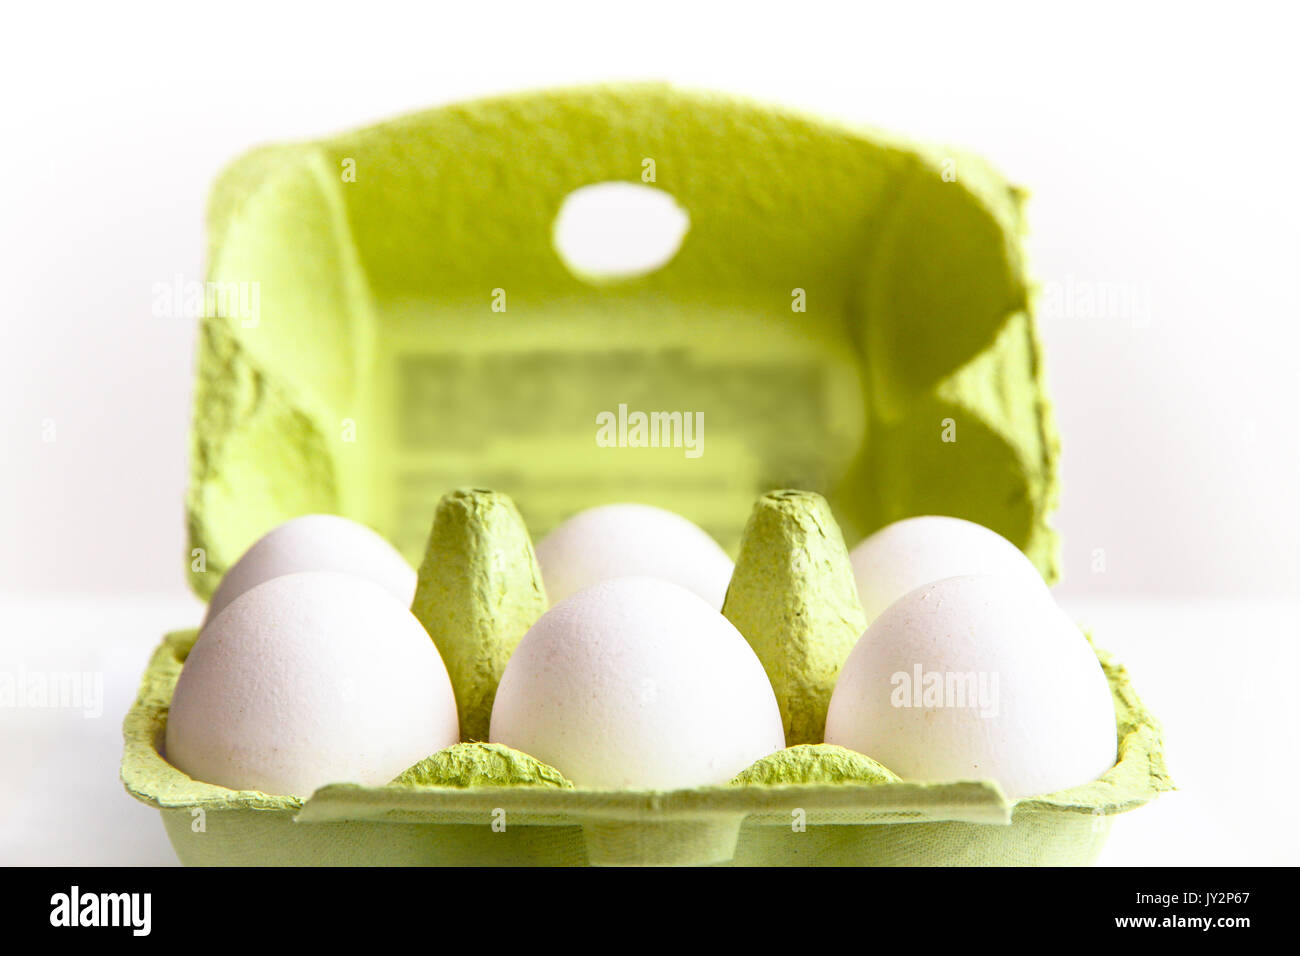 Six white eggs in a open green package, viewed from the top/side, against a white background closeup. Stock Photo